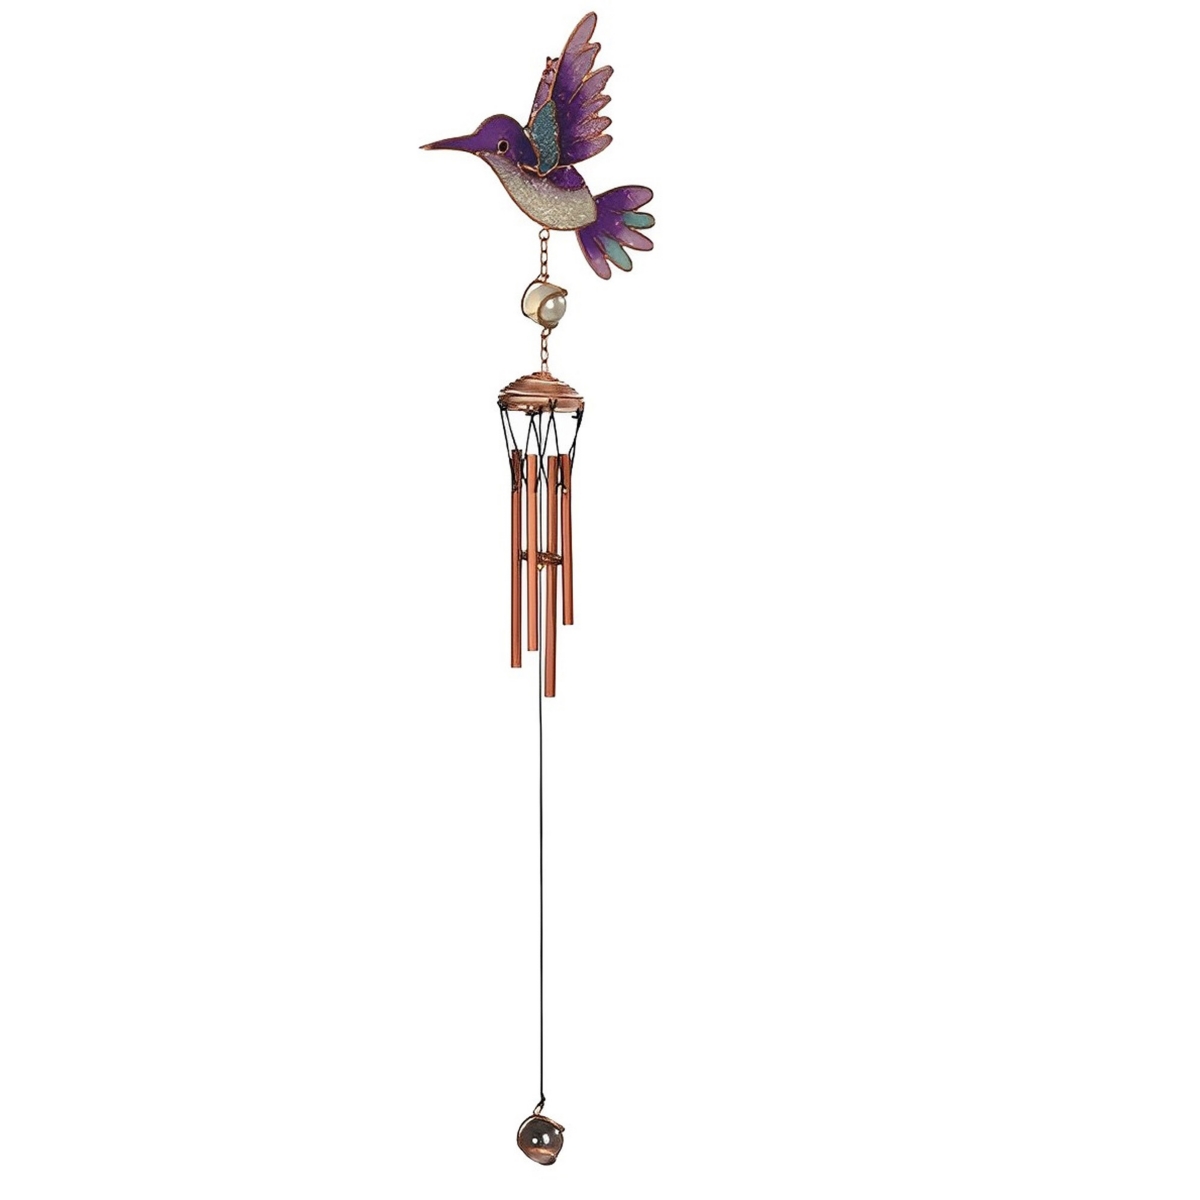 24" Long Blue and Purple Hummingbird Copper and Gem Wind Chime Home Decor Perfect Gift for House Warming, Holidays and Birthdays - Blue